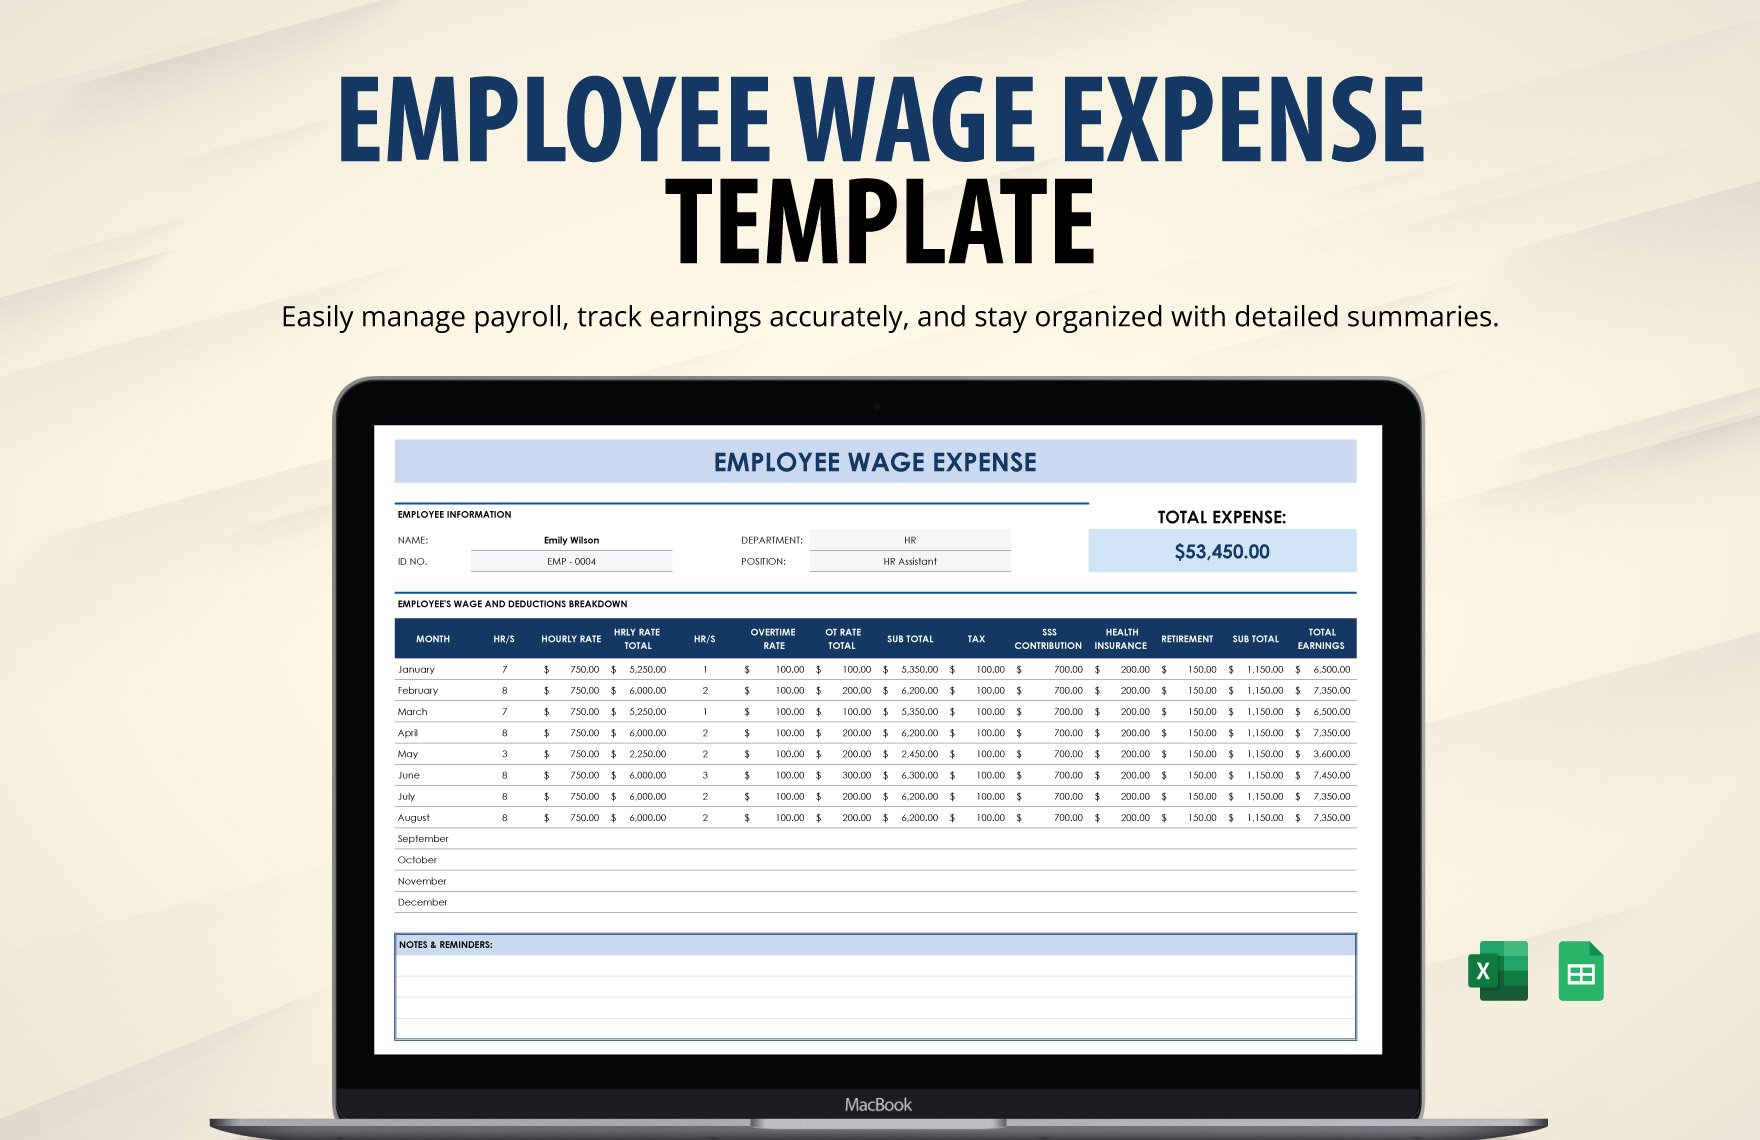 Employee Wage Expense Template in Excel, Google Sheets